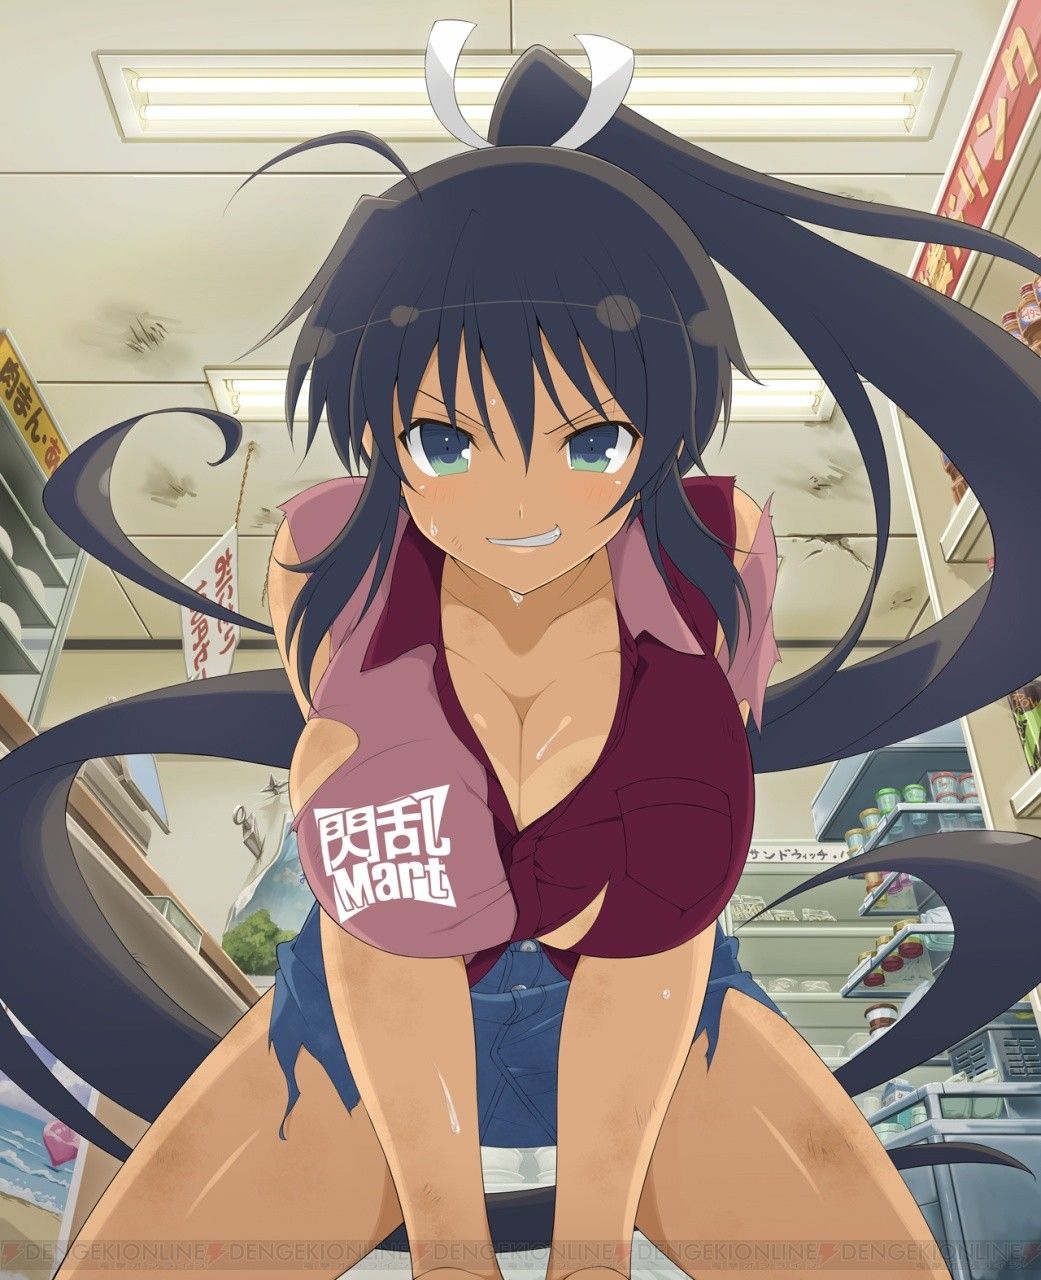 [Senran Kagura] [best PIE Championship] is held! Popular character vote is determined by the size of the breast! 9